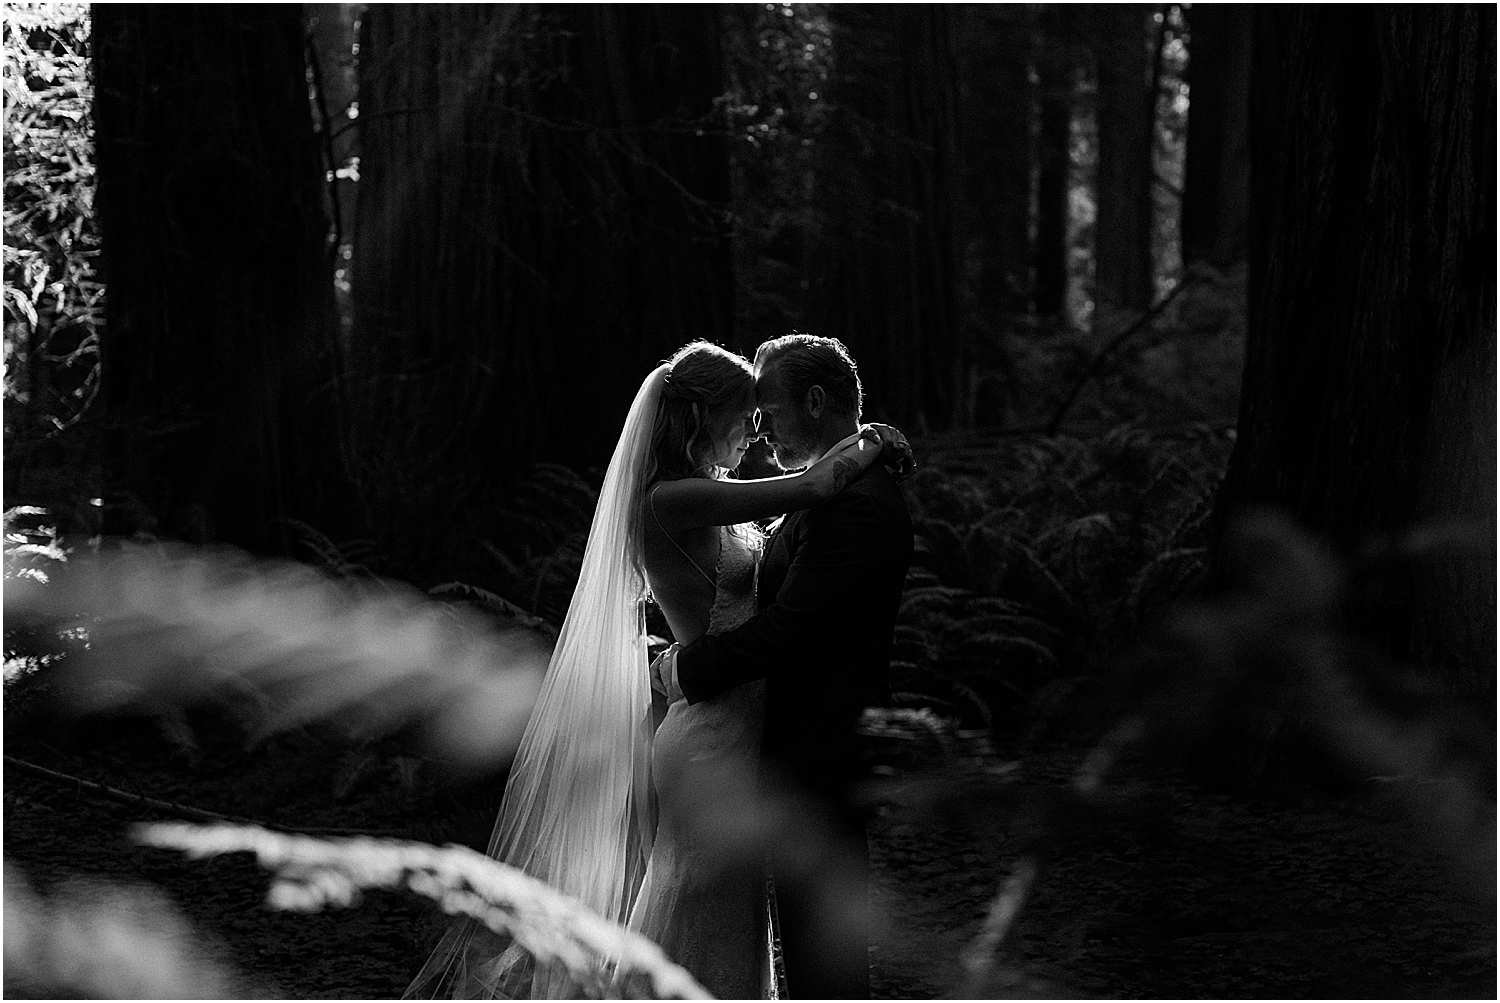 small wedding in redwoods national park and the northern california coast